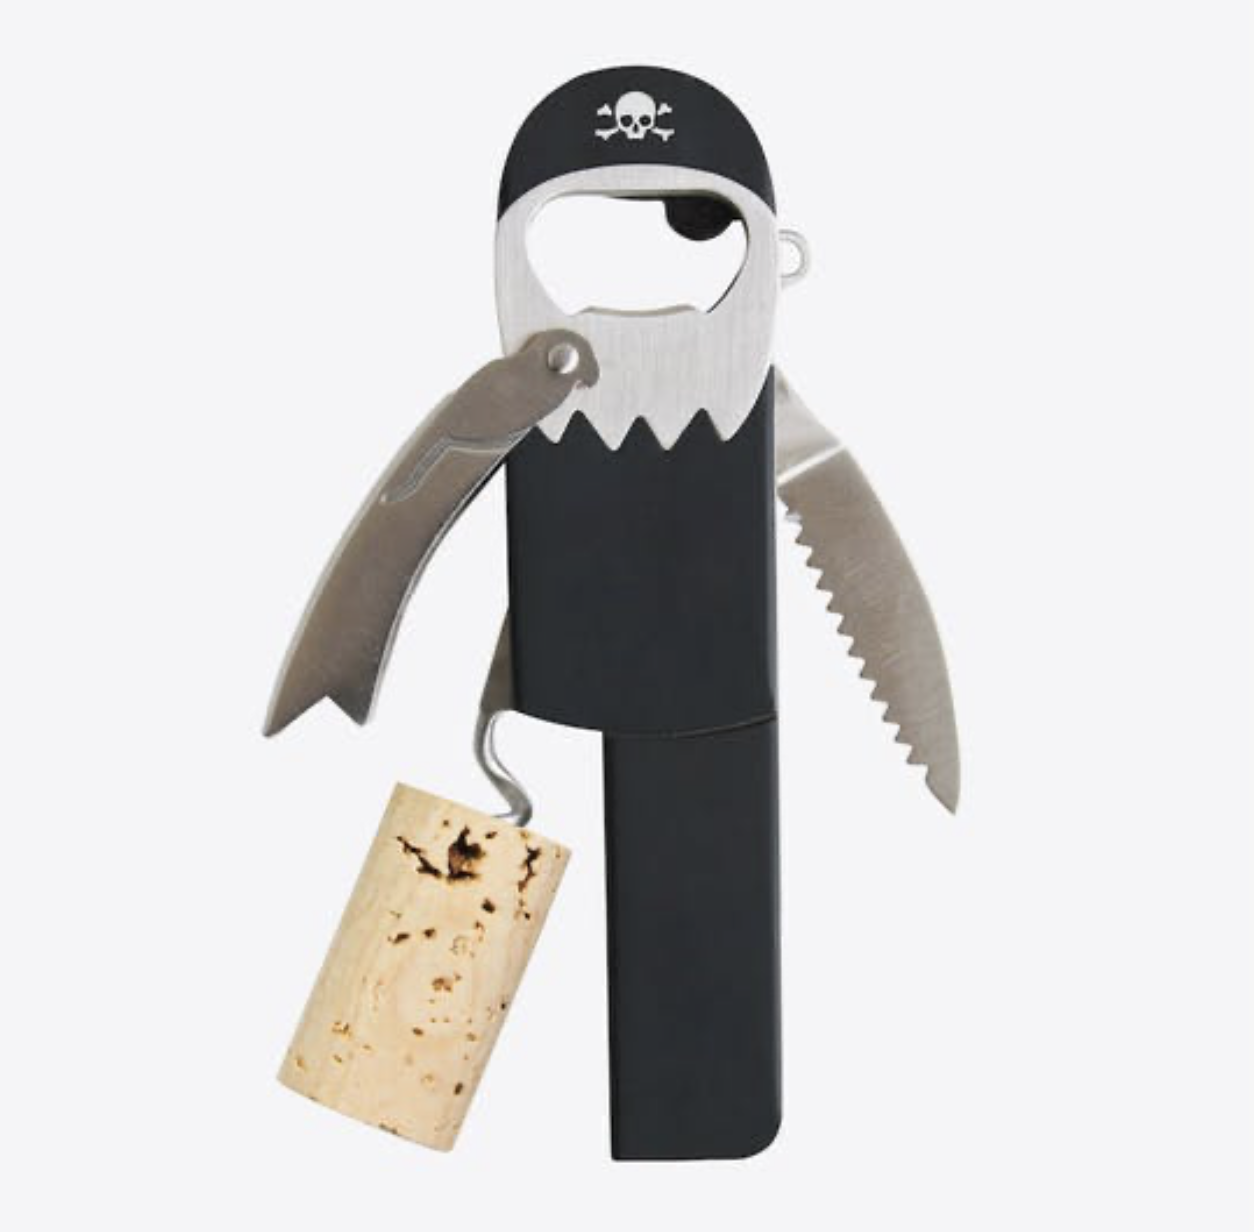 suck-uk-the-pirate-bottle-opener-and-corkscrew